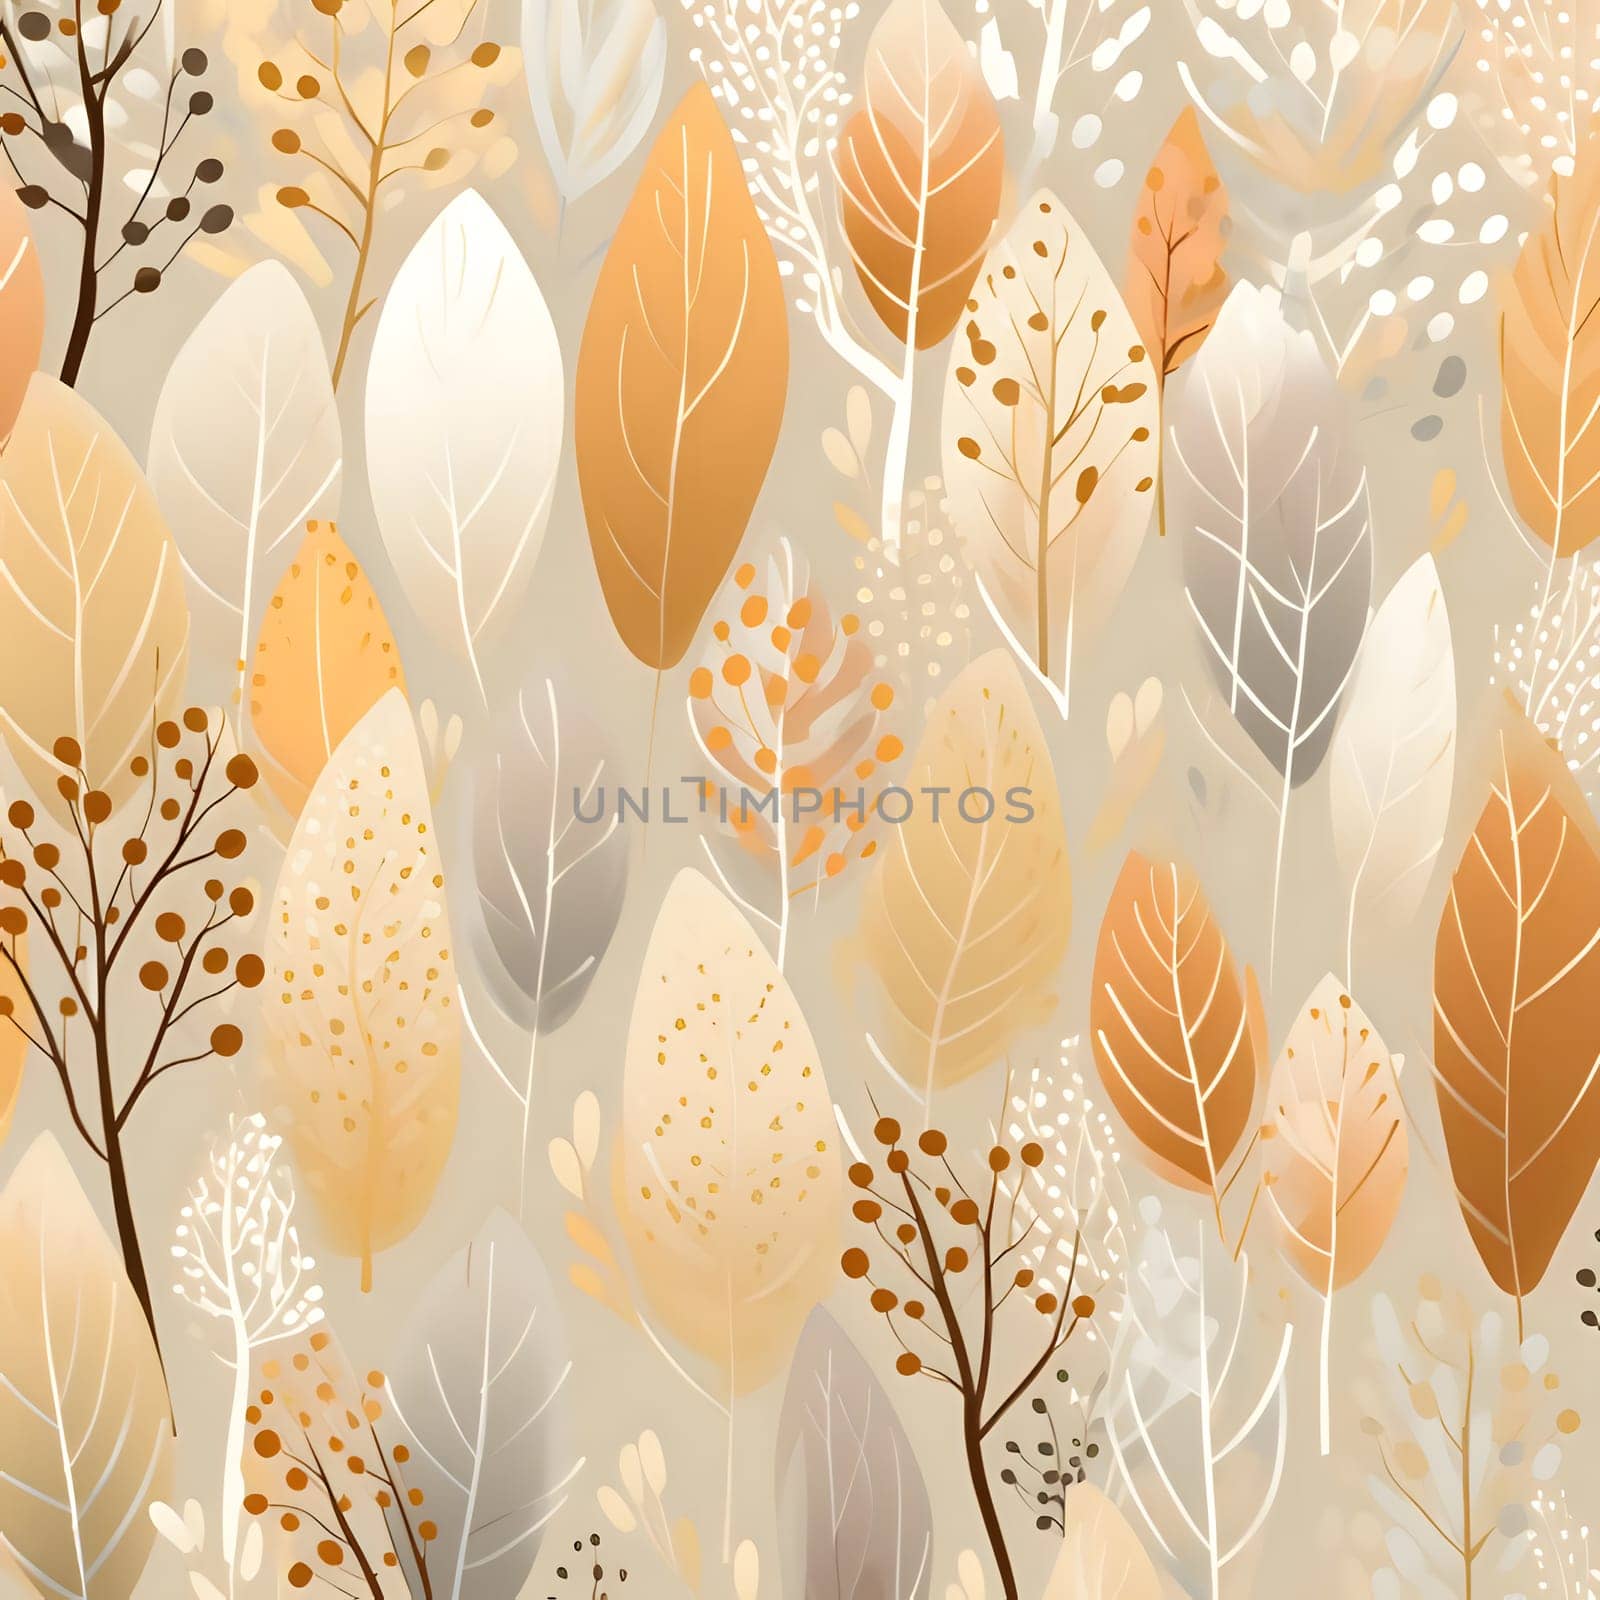 Patterns and banners backgrounds: Seamless pattern with autumn leaves. Vector illustration. EPS 10